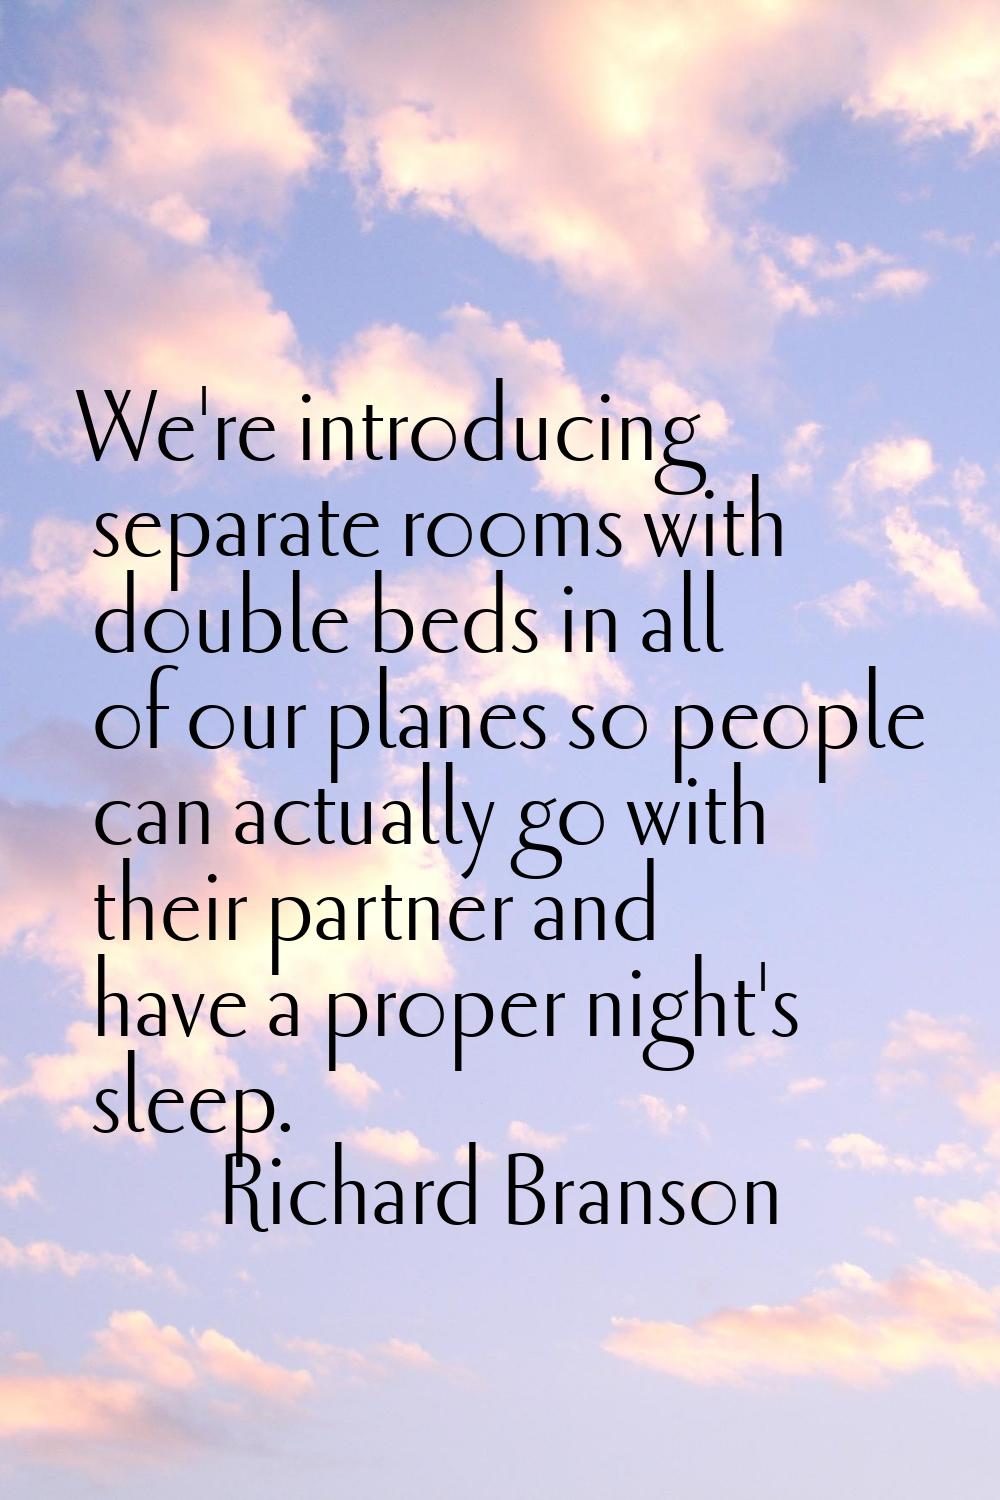 We're introducing separate rooms with double beds in all of our planes so people can actually go wi